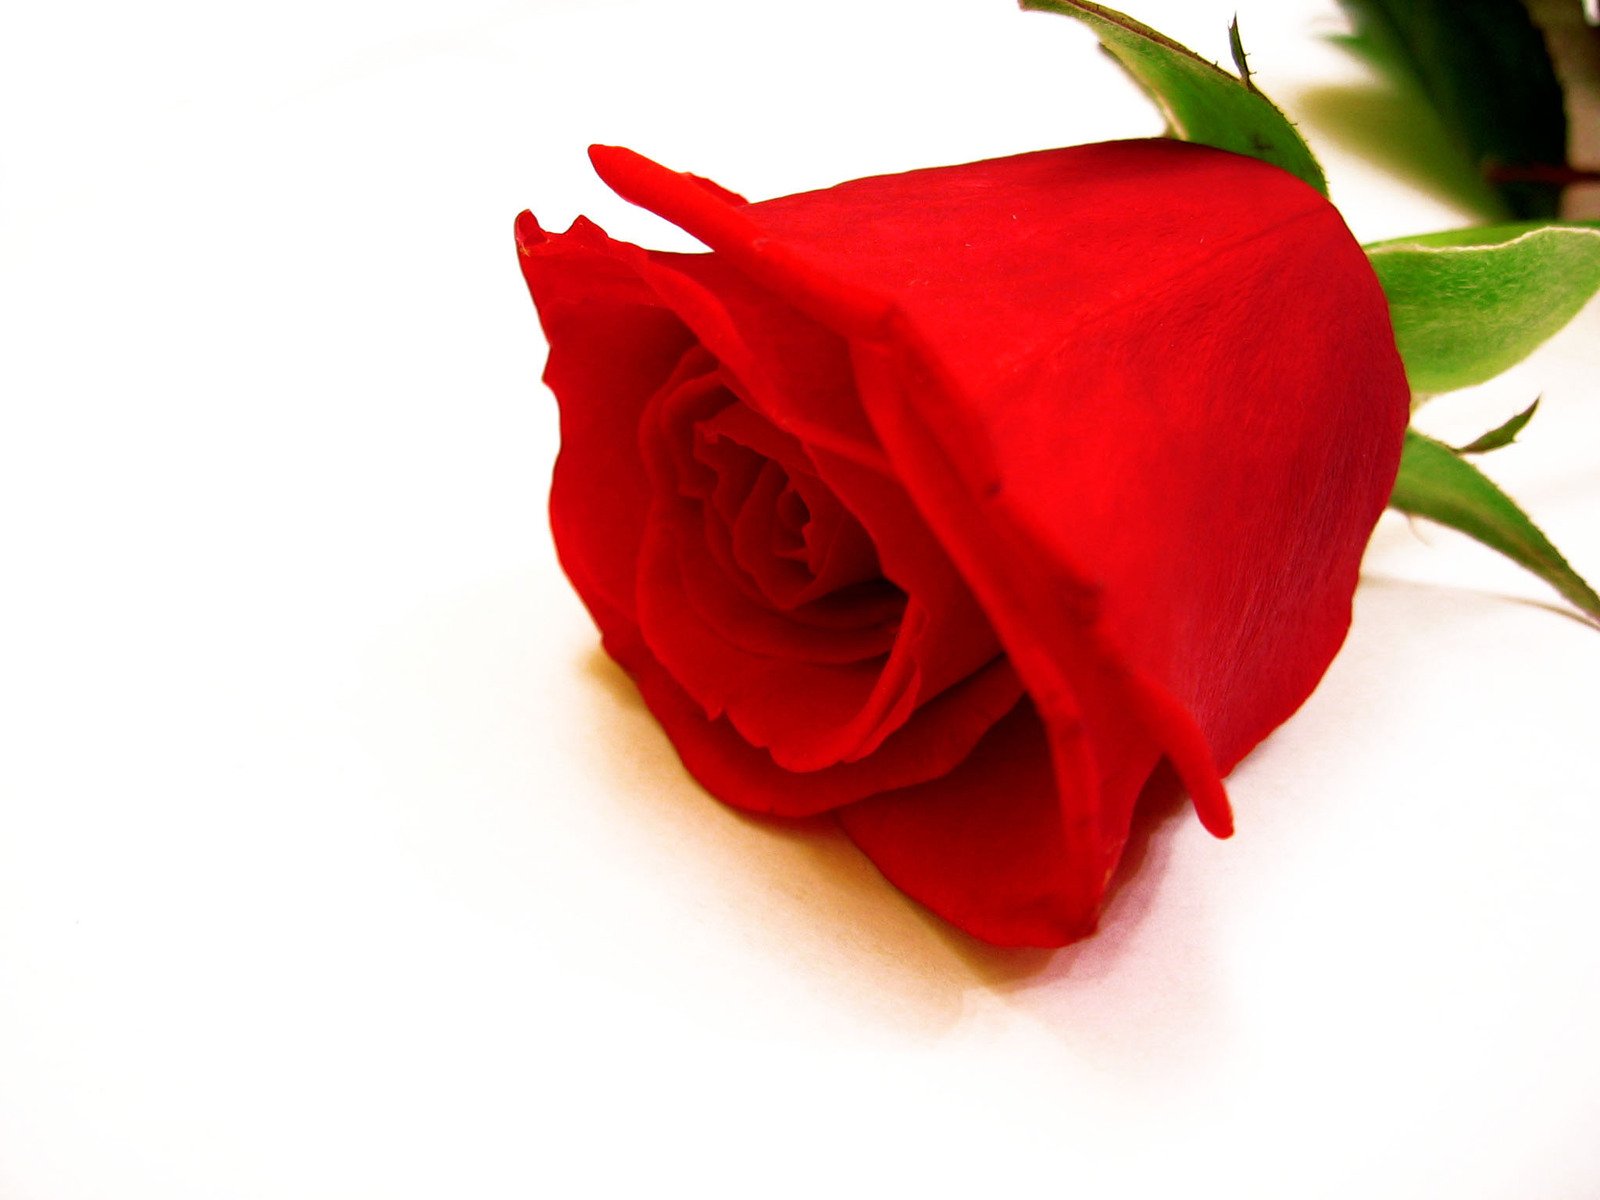 a single red rose sitting on the ground